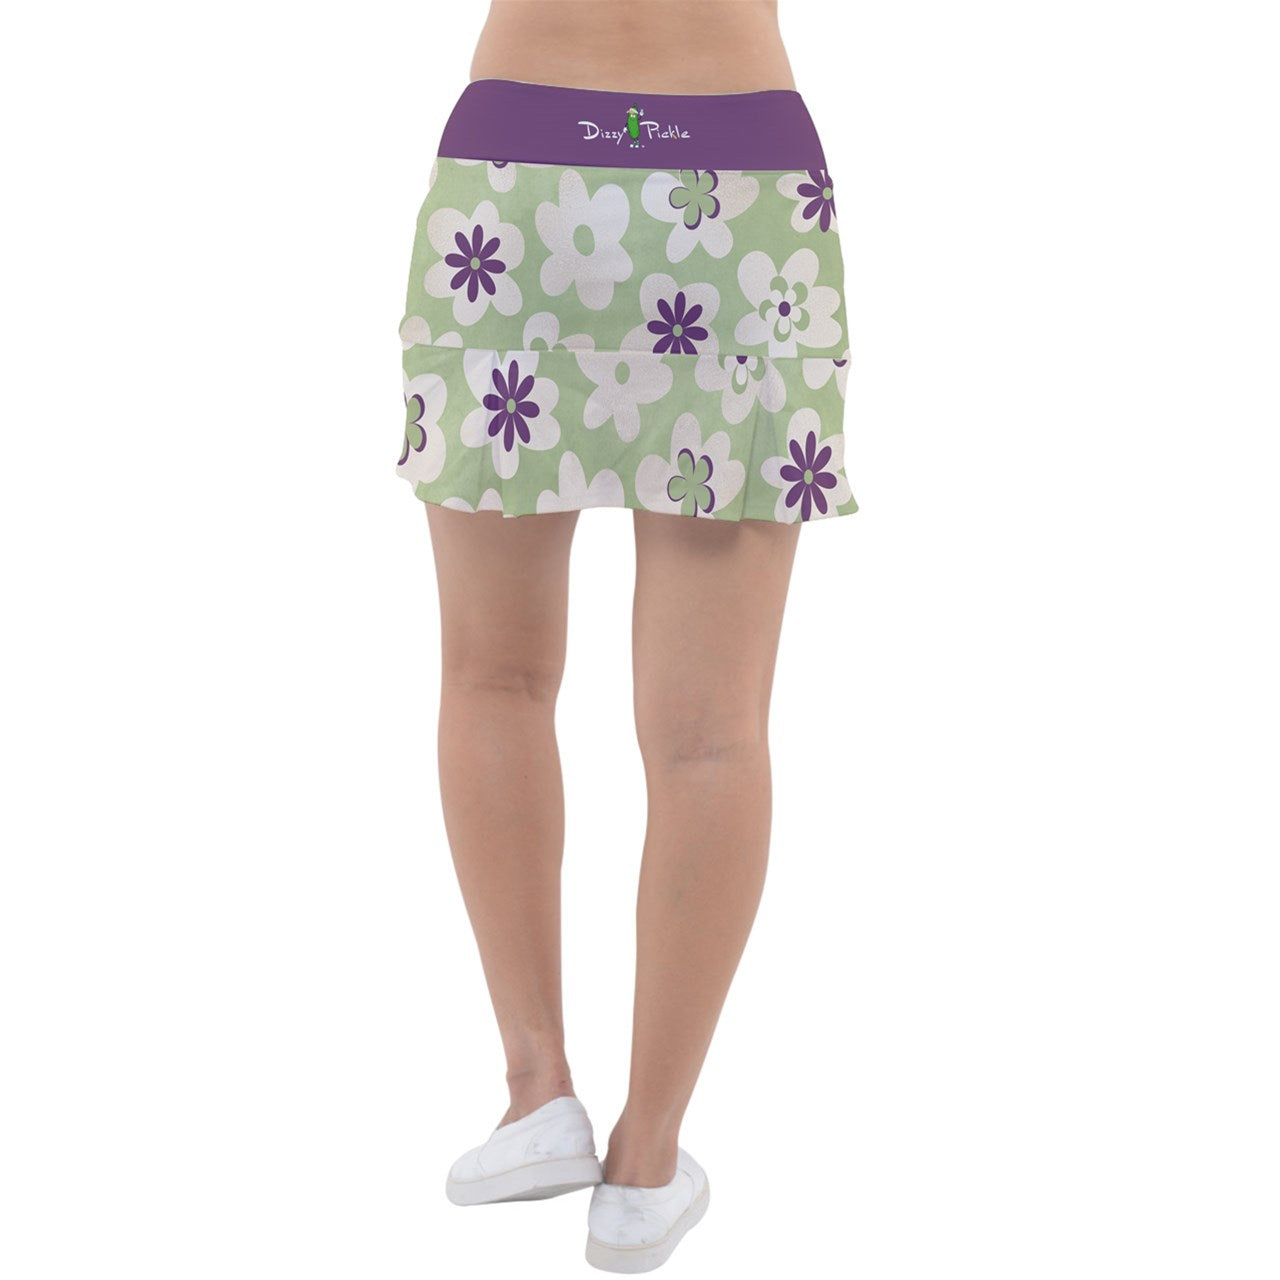 Dizzy Pickle Heather Main Classic Women's Pickleball Pleated Skorts with Inner Shorts & Pockets Sage